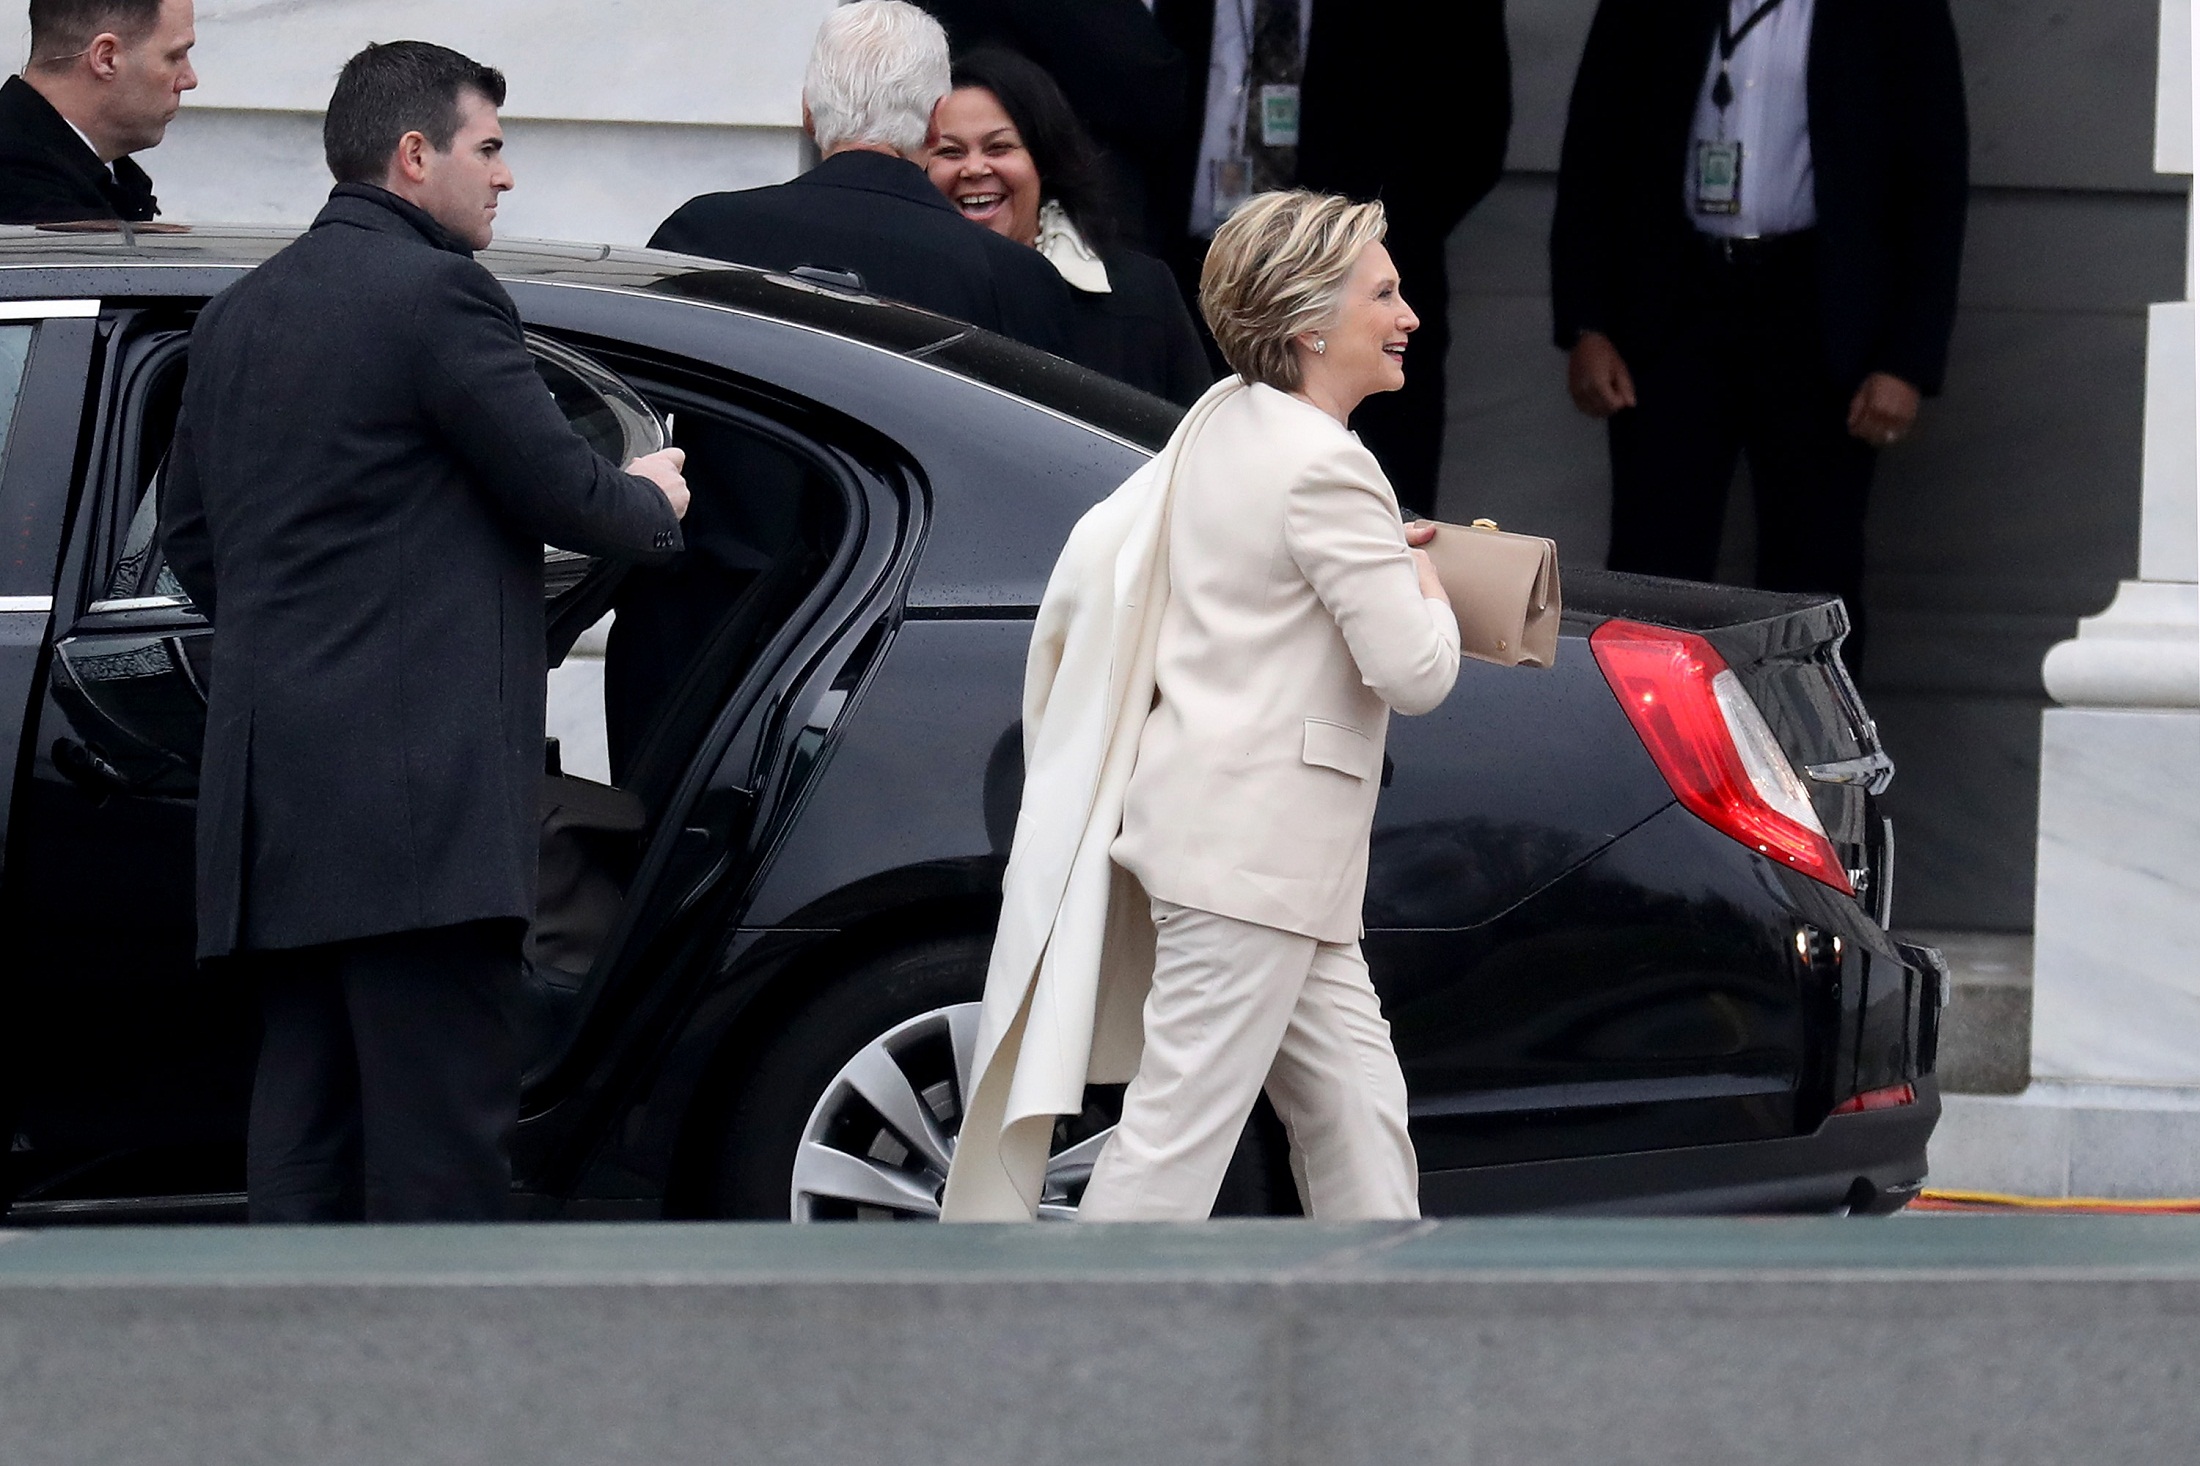 WASHINGTON, DC - JANUARY 20: Hillary Clinton arrives at the U.S. Capitol on January 20, 2017 in Washington, DC. In today's inauguration ceremony Donald J. Trump becomes the 45th president of the United States.   Rob Carr/Getty Images/AFP